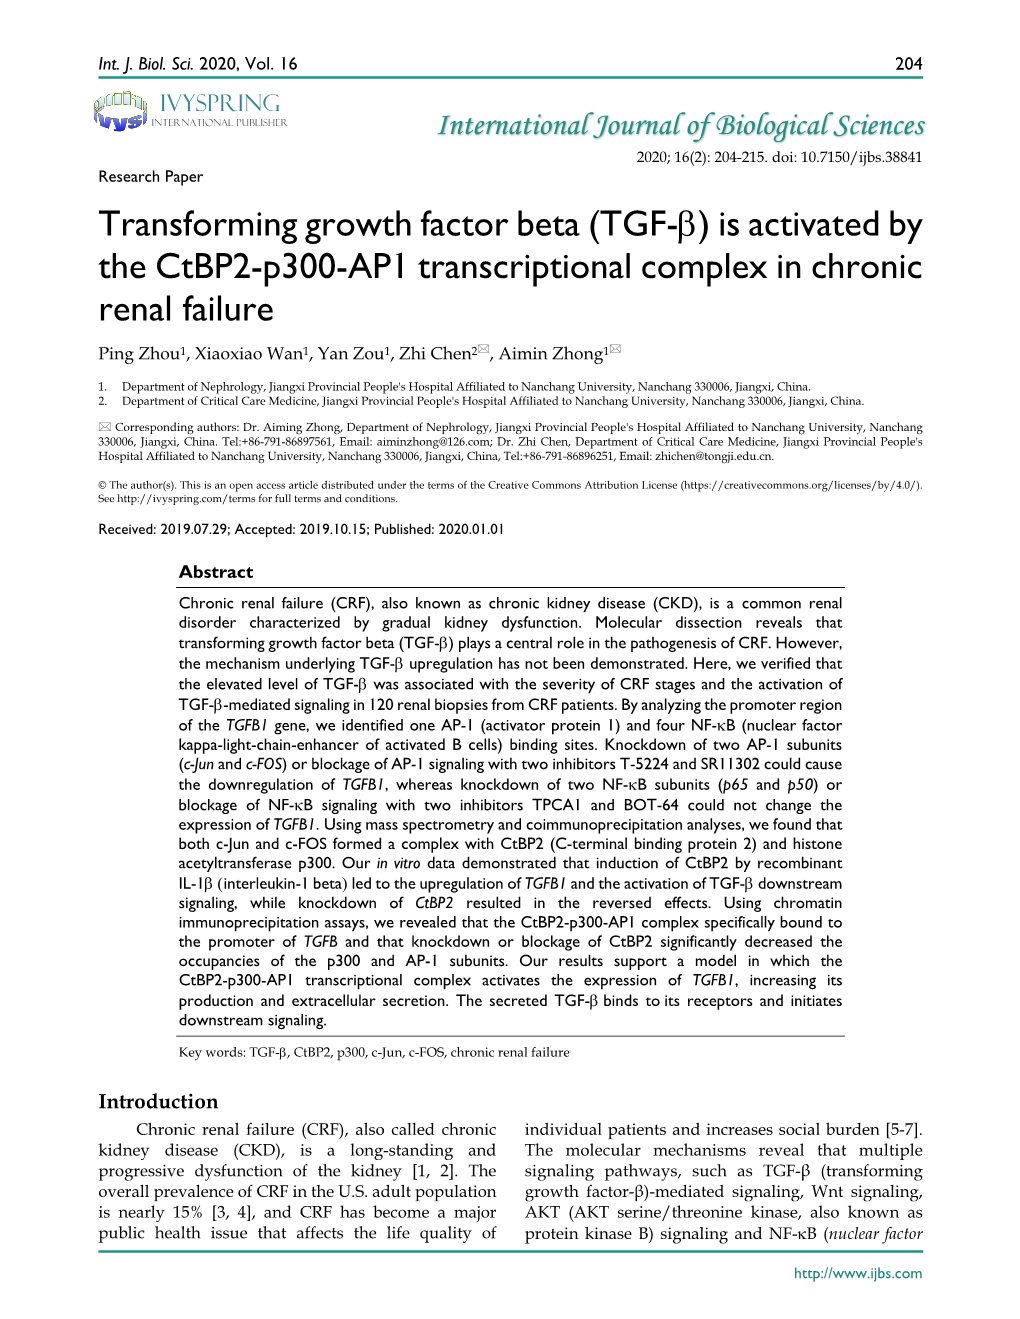 Transforming Growth Factor Beta (TGF-Β) Is Activated by the Ctbp2-P300